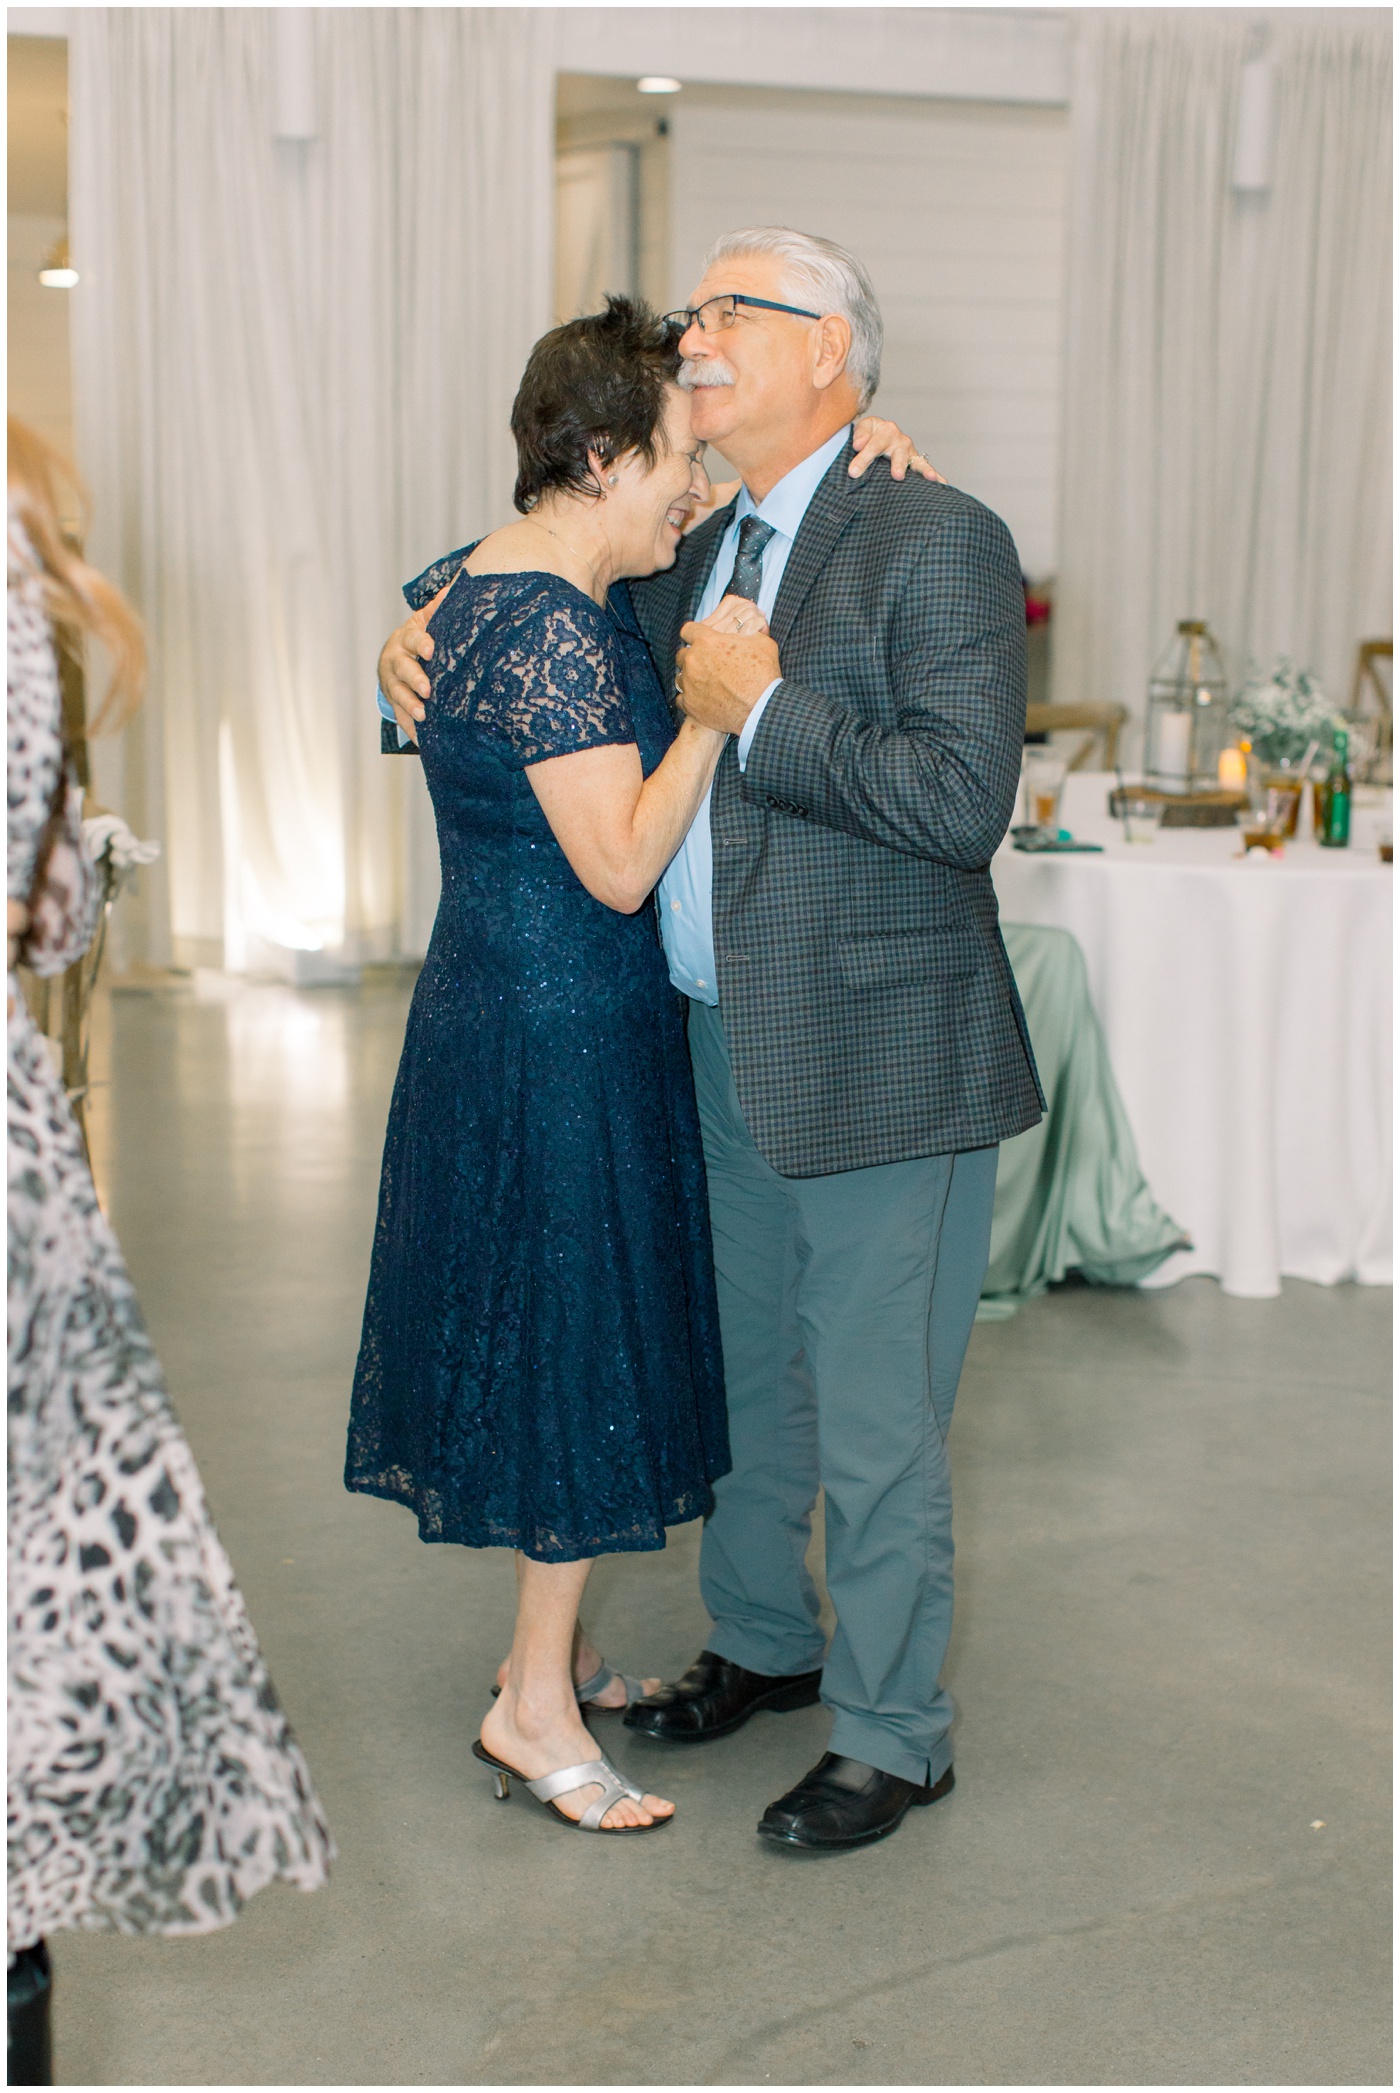 the grandparents of the groom smile as they dance together